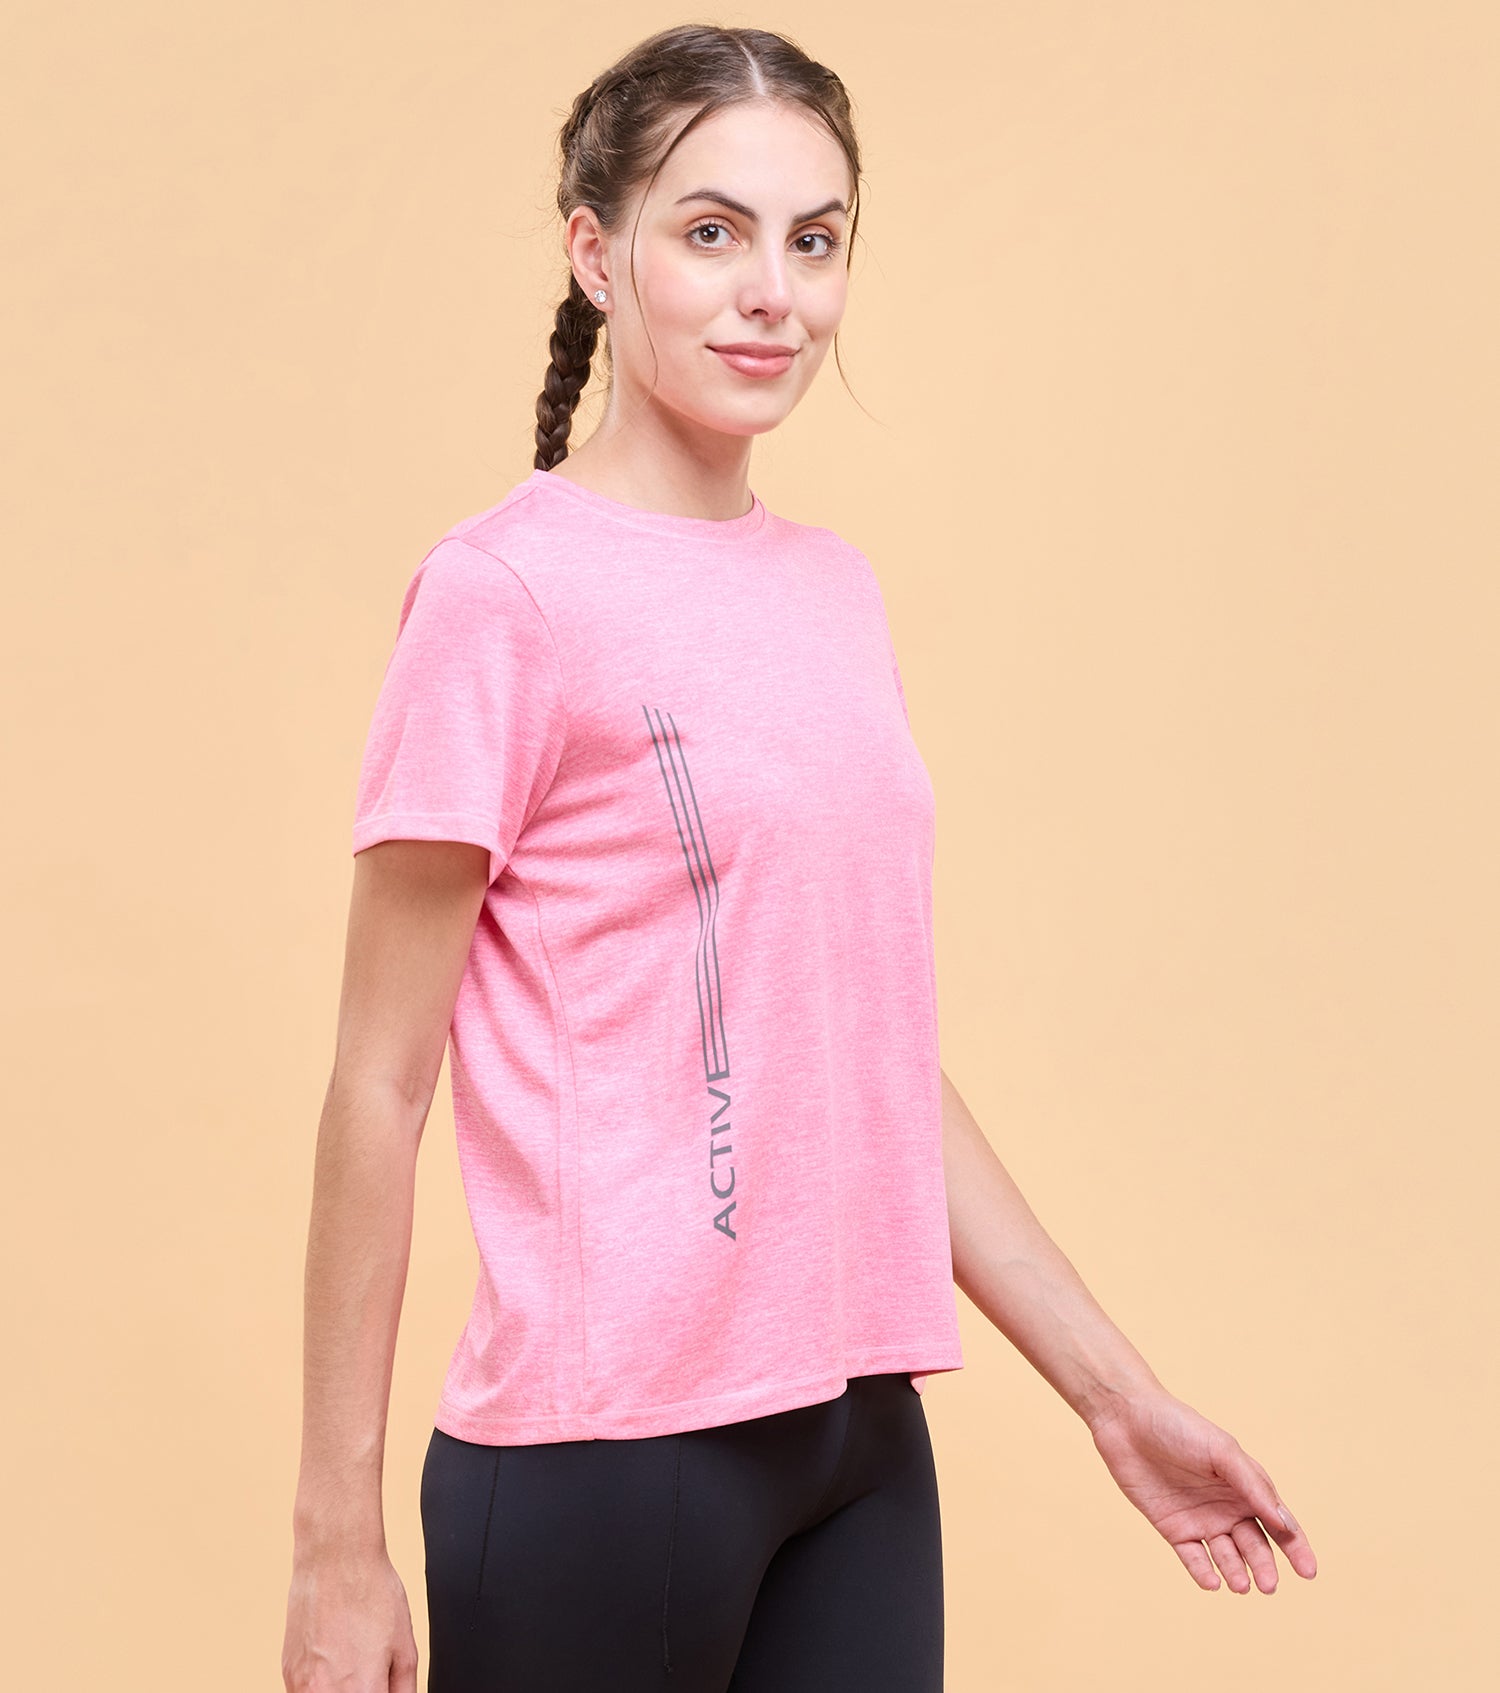 Enamor Womens Athleisure A309- Basic Workout Dry Fit Crew Neck Activewear Tee